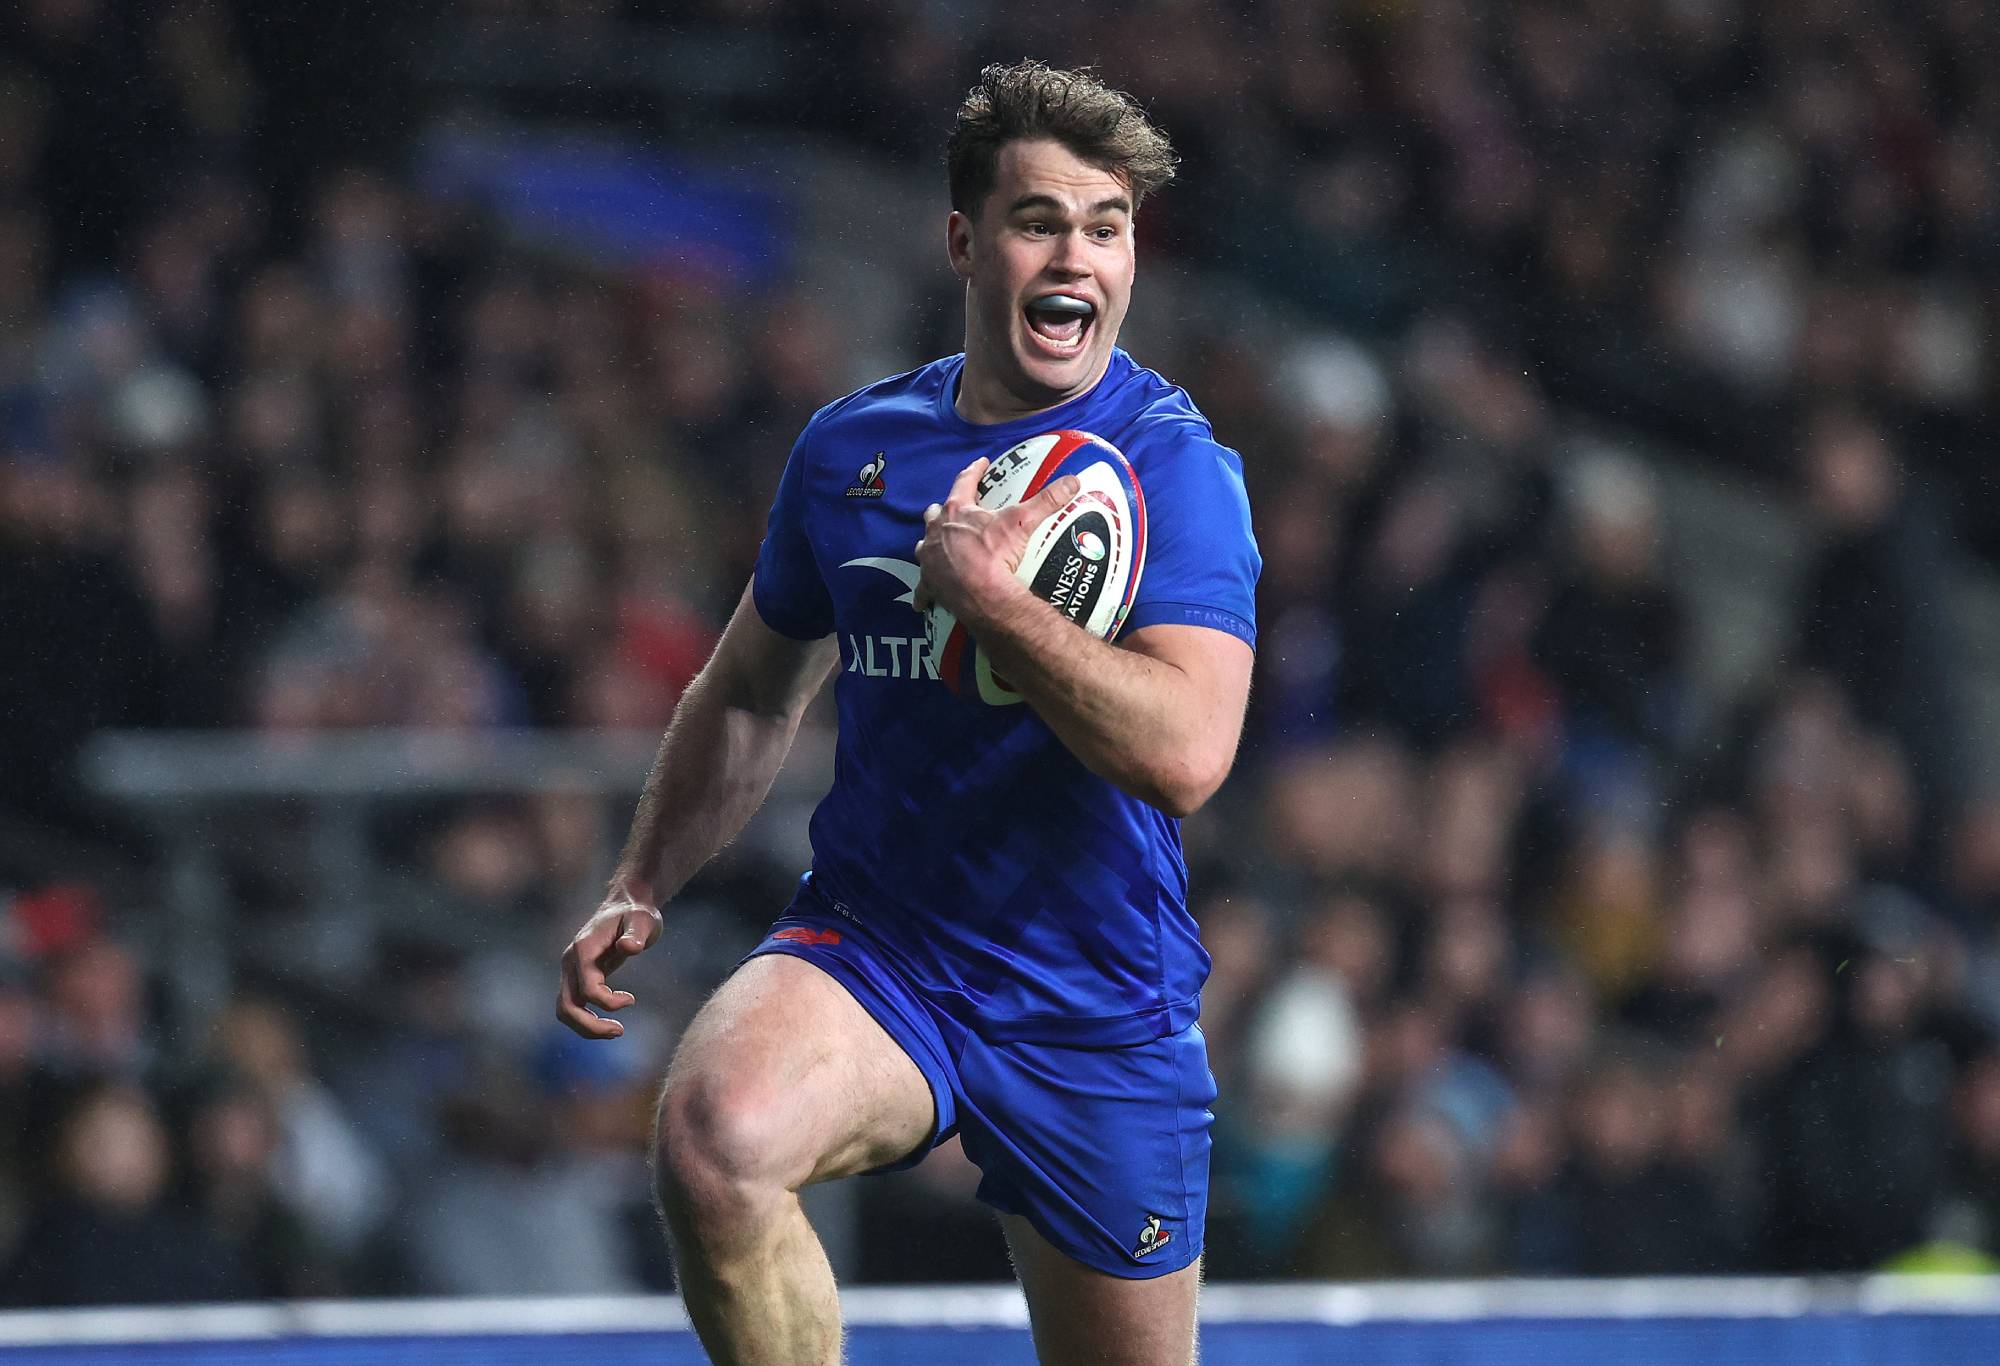 Damian Penaud of France celebrates early as he sees a clear path to score his 5th try during the Guinness Six Nations Rugby match between England and France at Twickenham Stadium on March 11, 2023 in London, United Kingdom. (Photo by Charlotte Wilson/Offside/Offside via Getty Images)